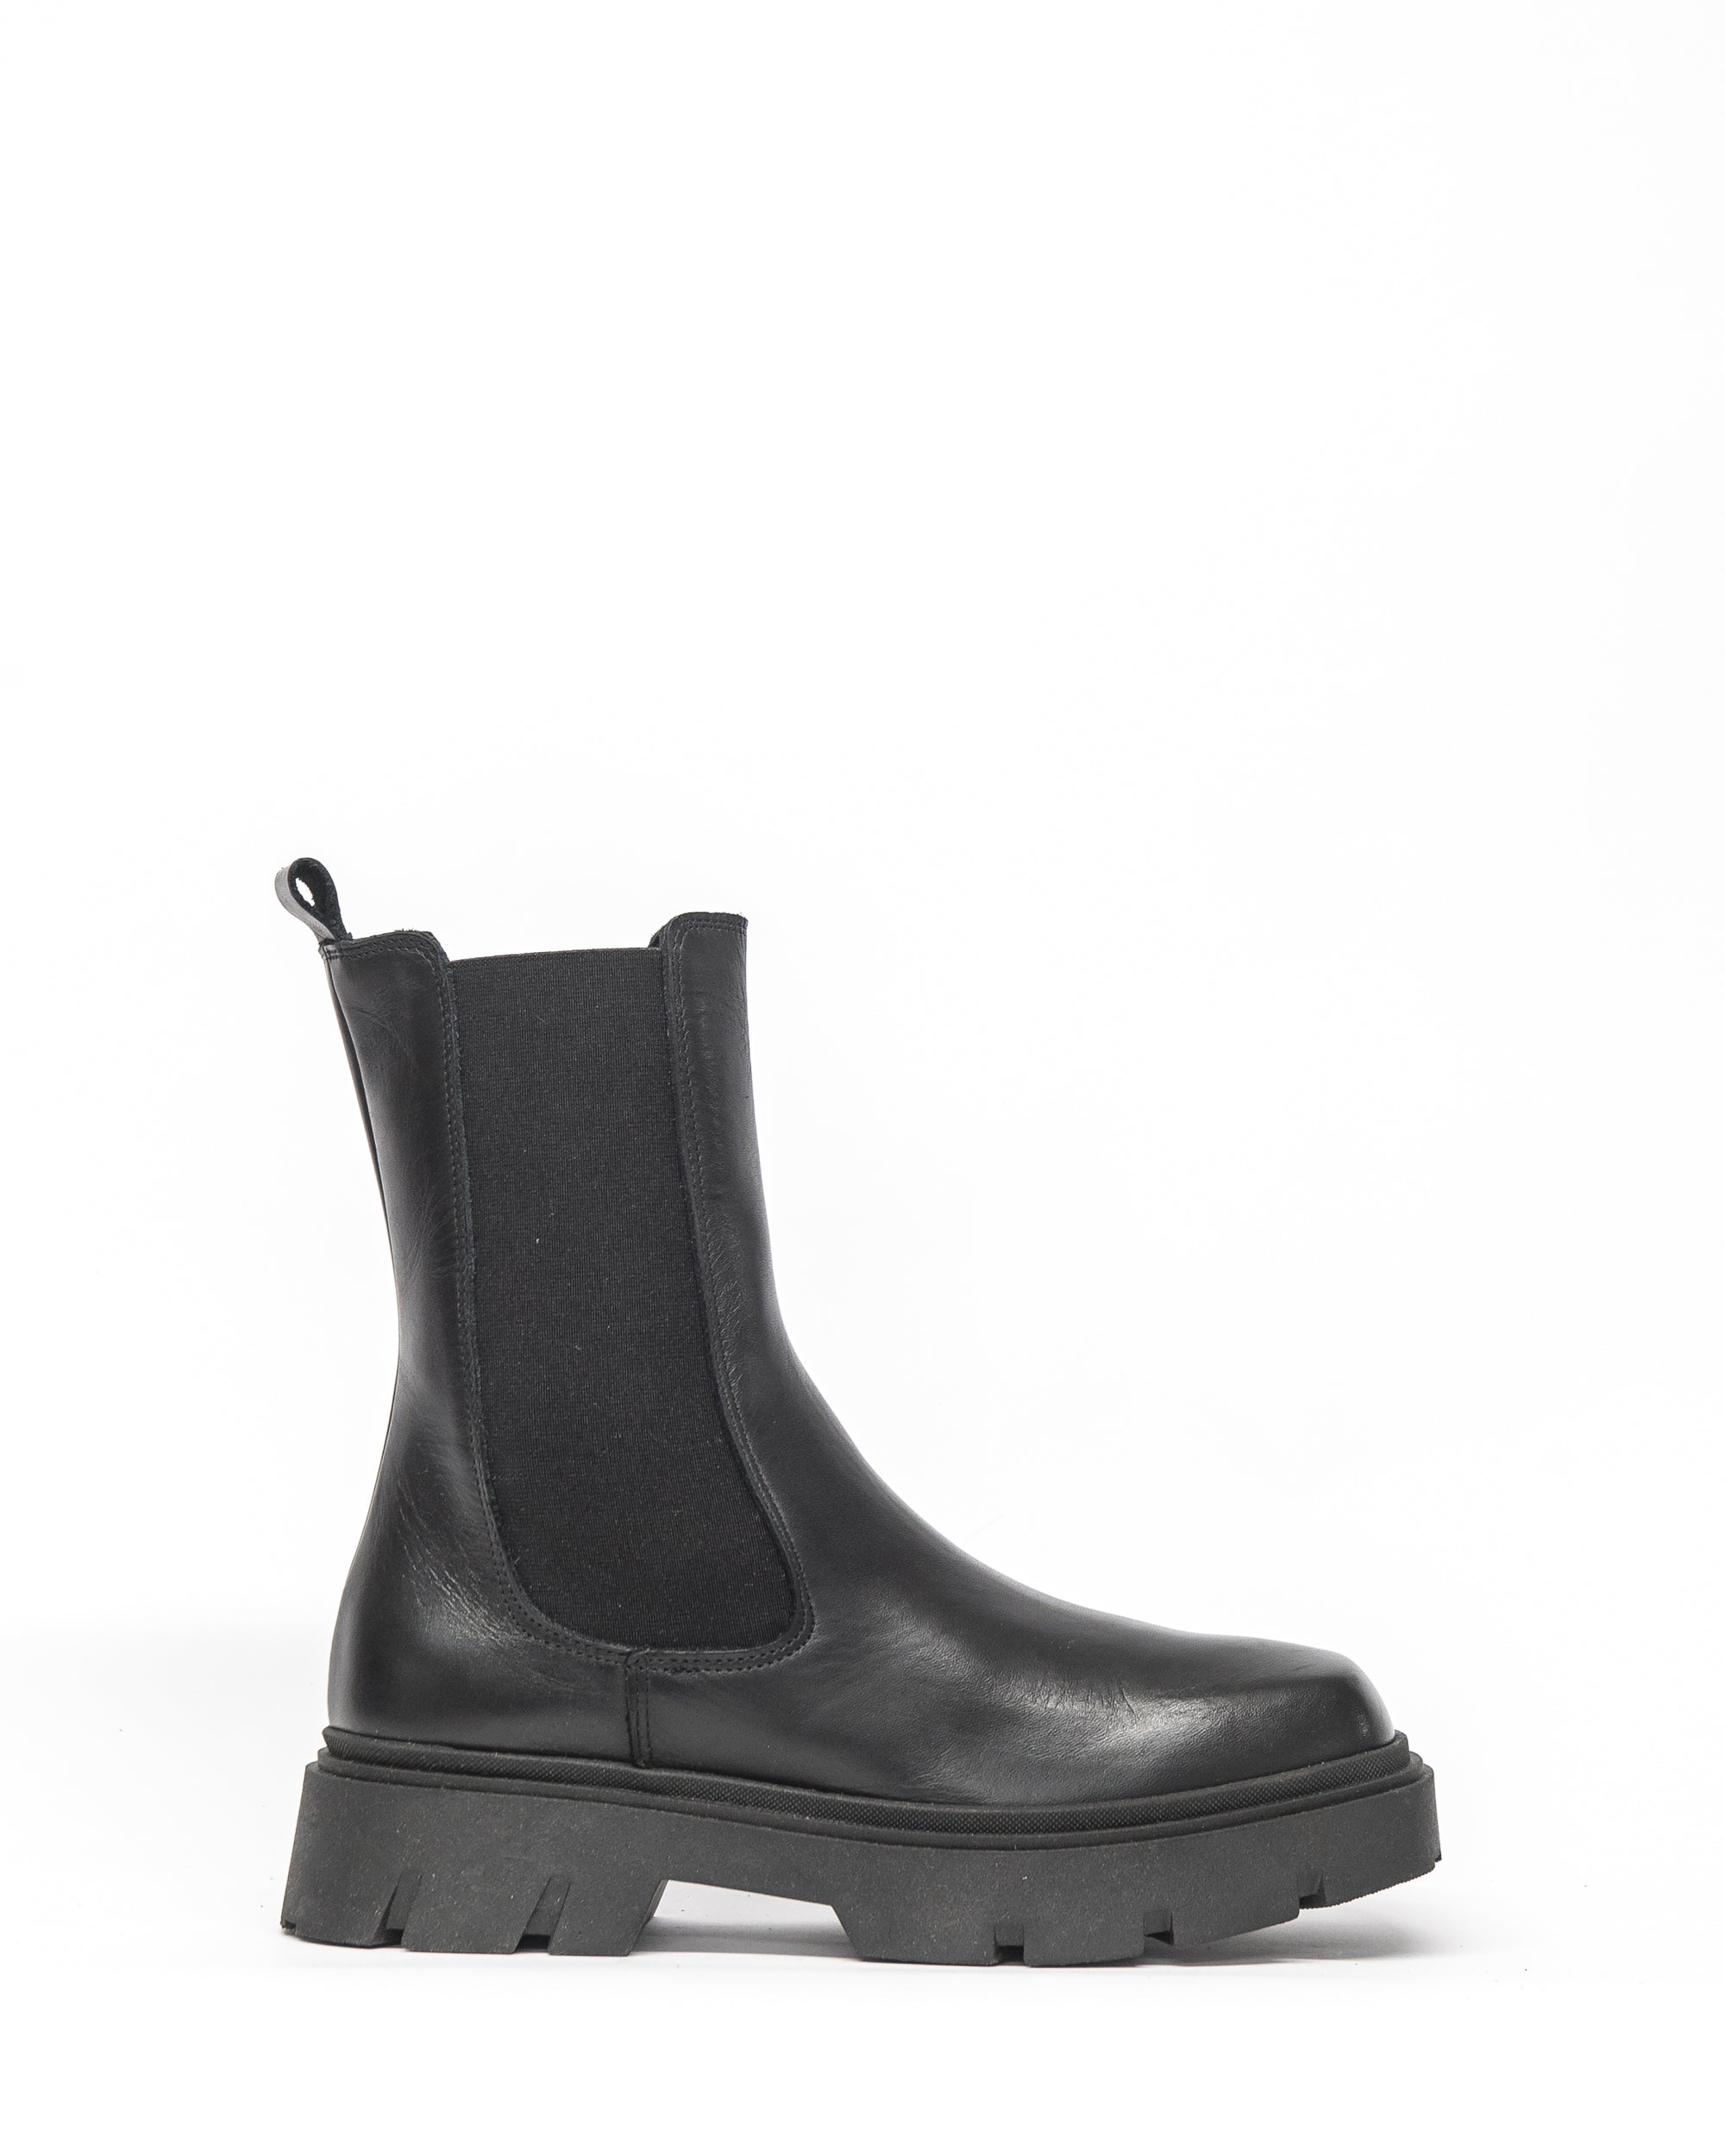 empire boot - black leather